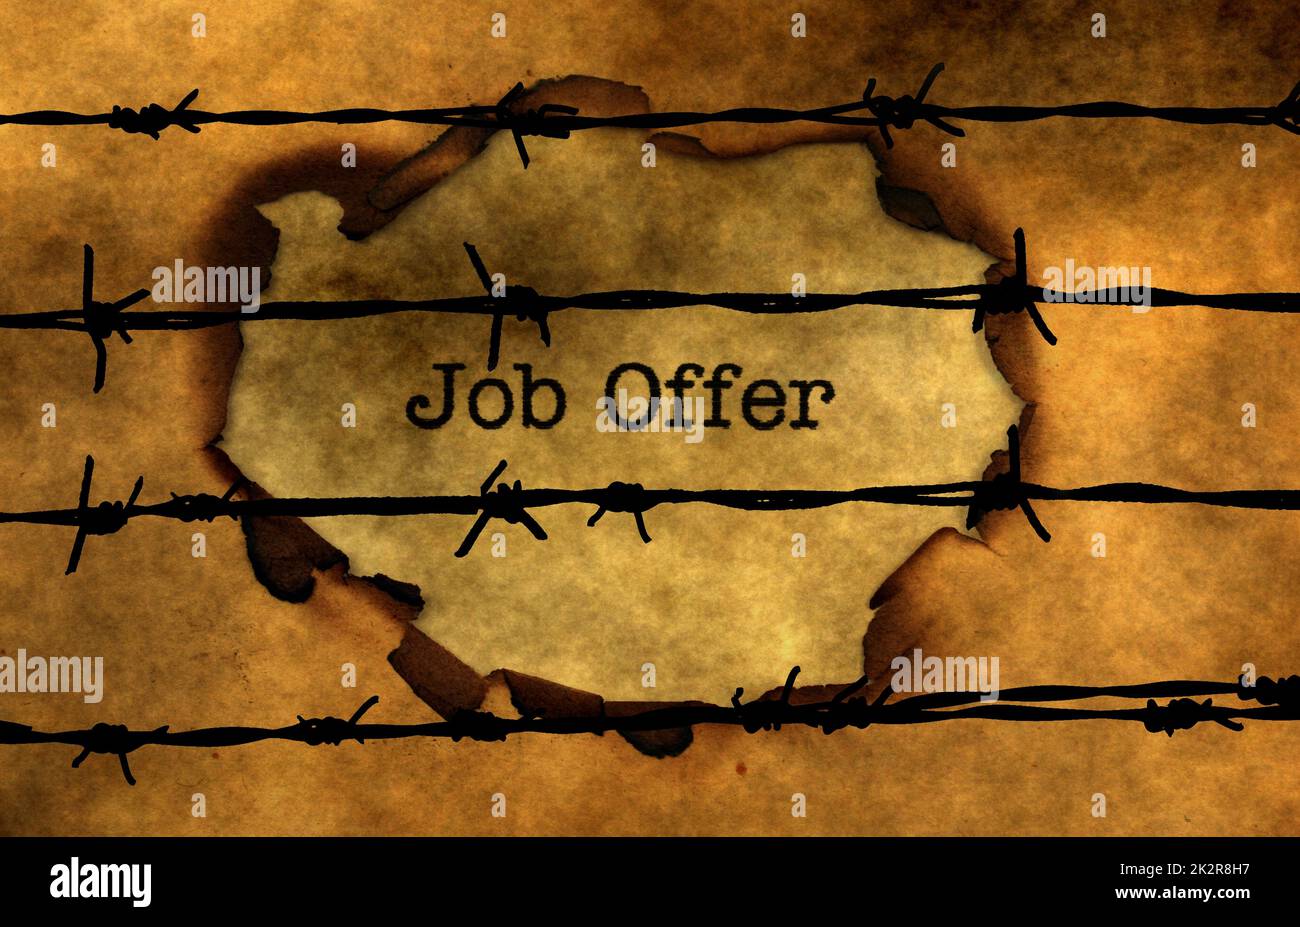 Job offer concept against barbwire Stock Photo